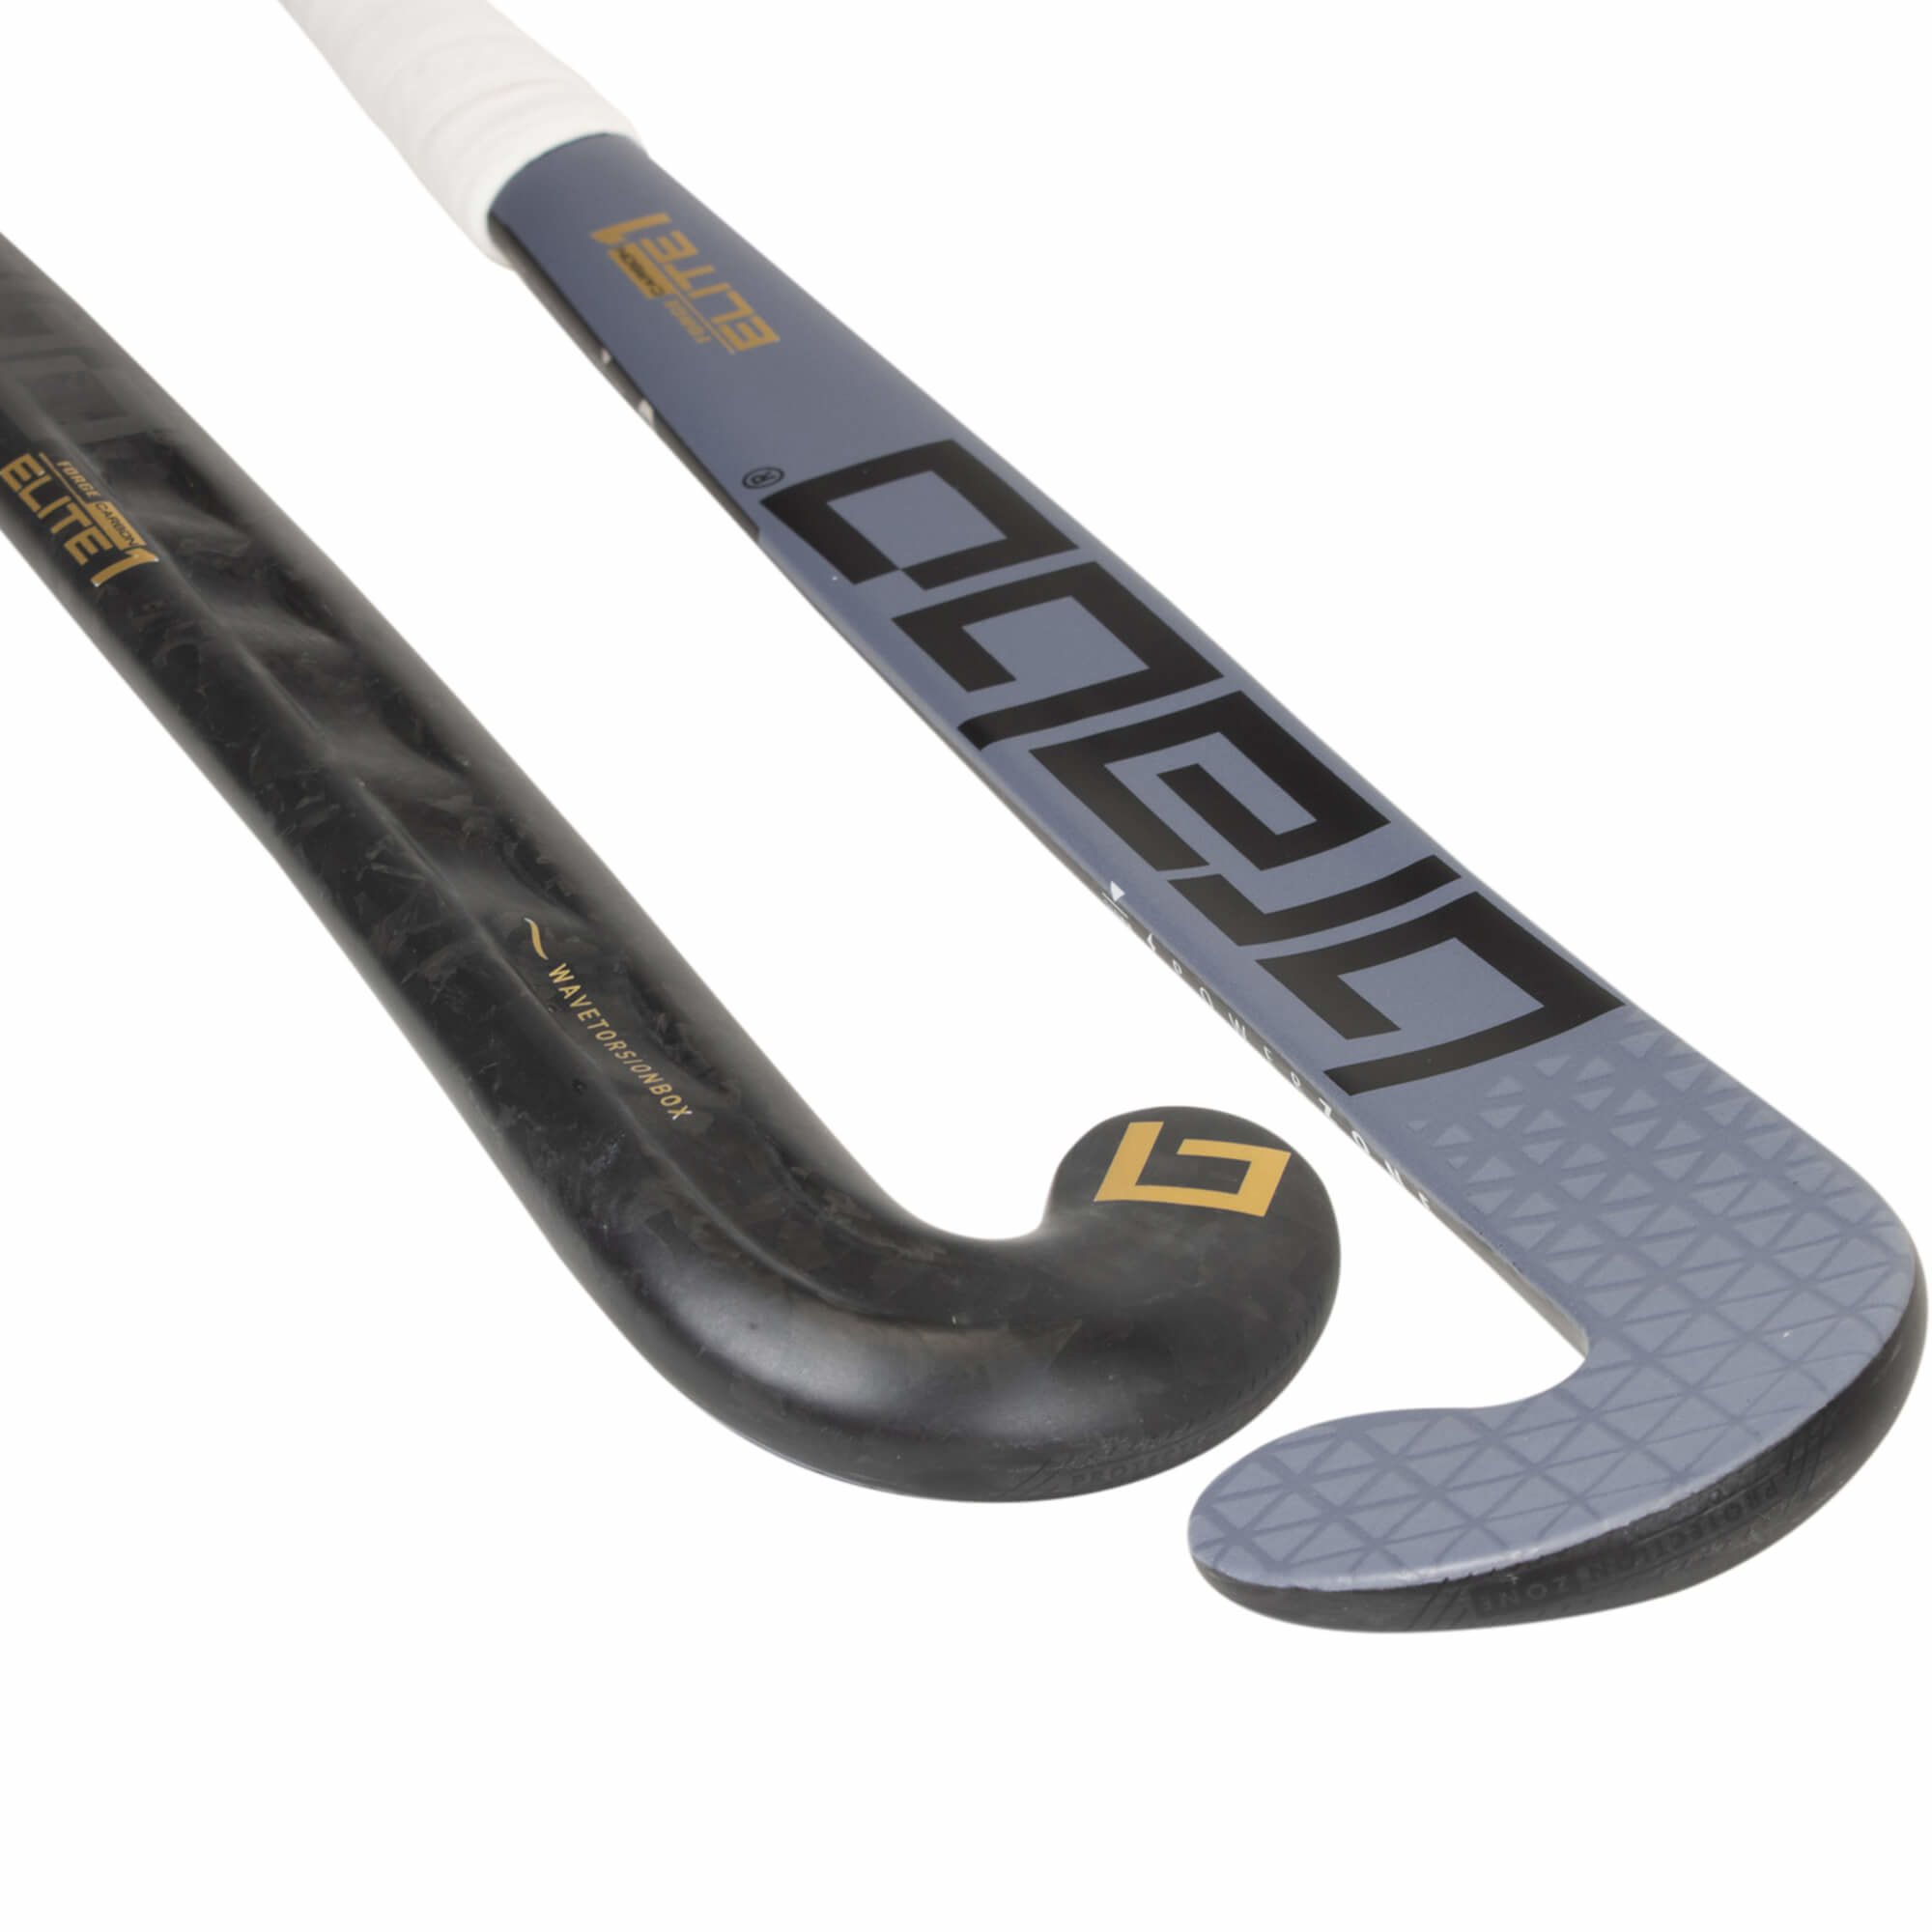 Mysterie Geven Productief Brabo Elite 1 WTB Forged Carbon DF - Hockeypoint